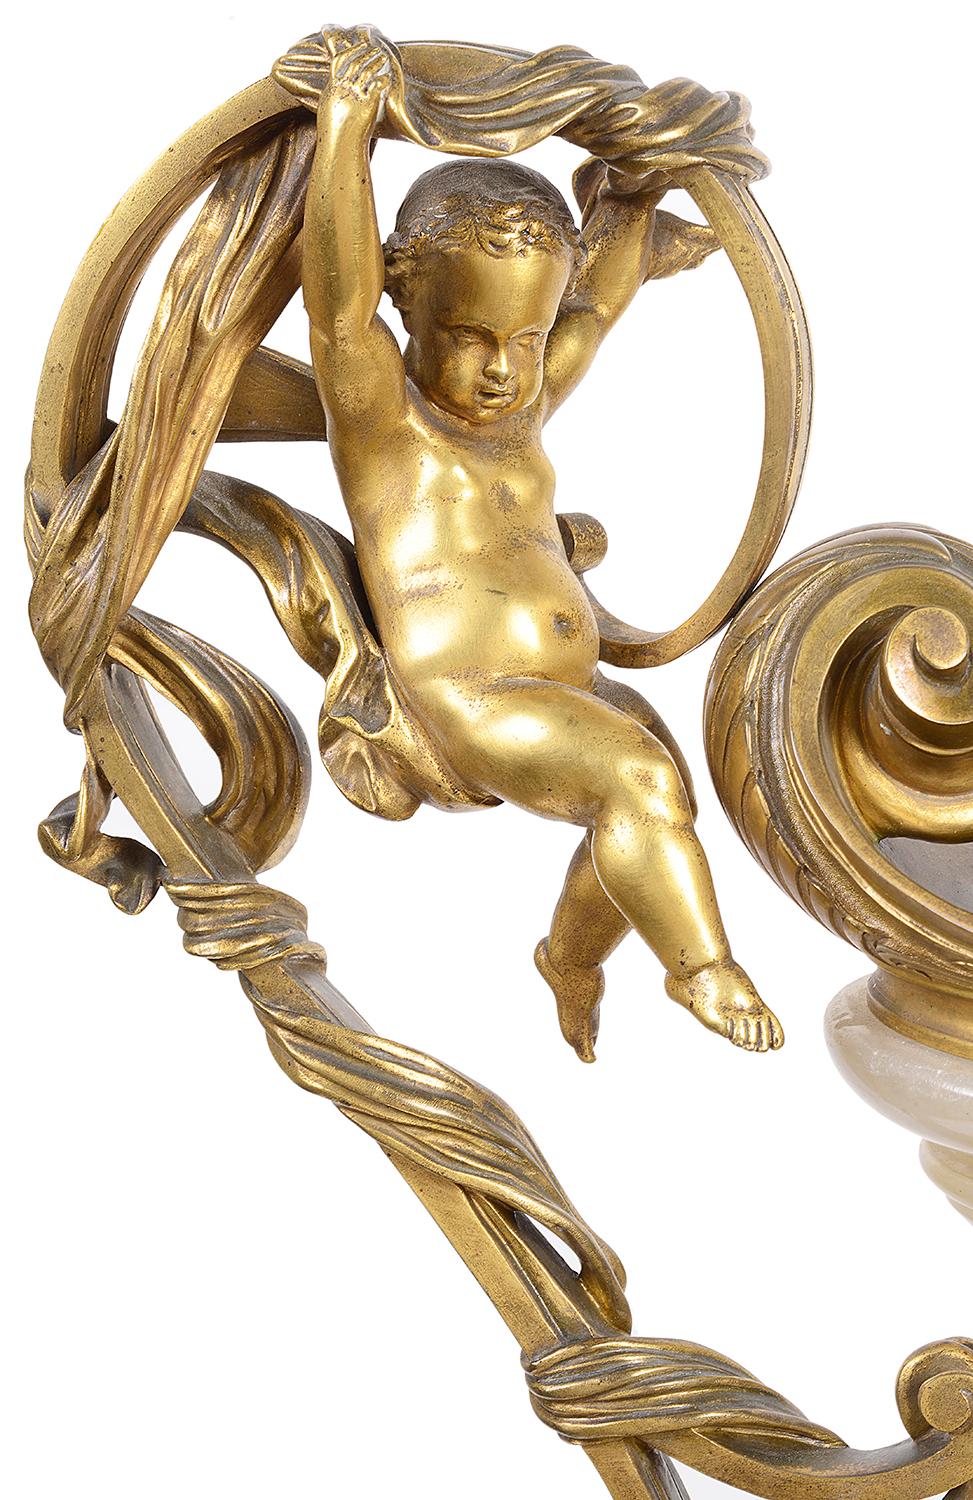 A very impressive good quality late 19th century French white onyx and gilded ormolu ewer. Having three cherubs around it, one swinging, one in thought the other playing with a swan. Measures: 60cm (24